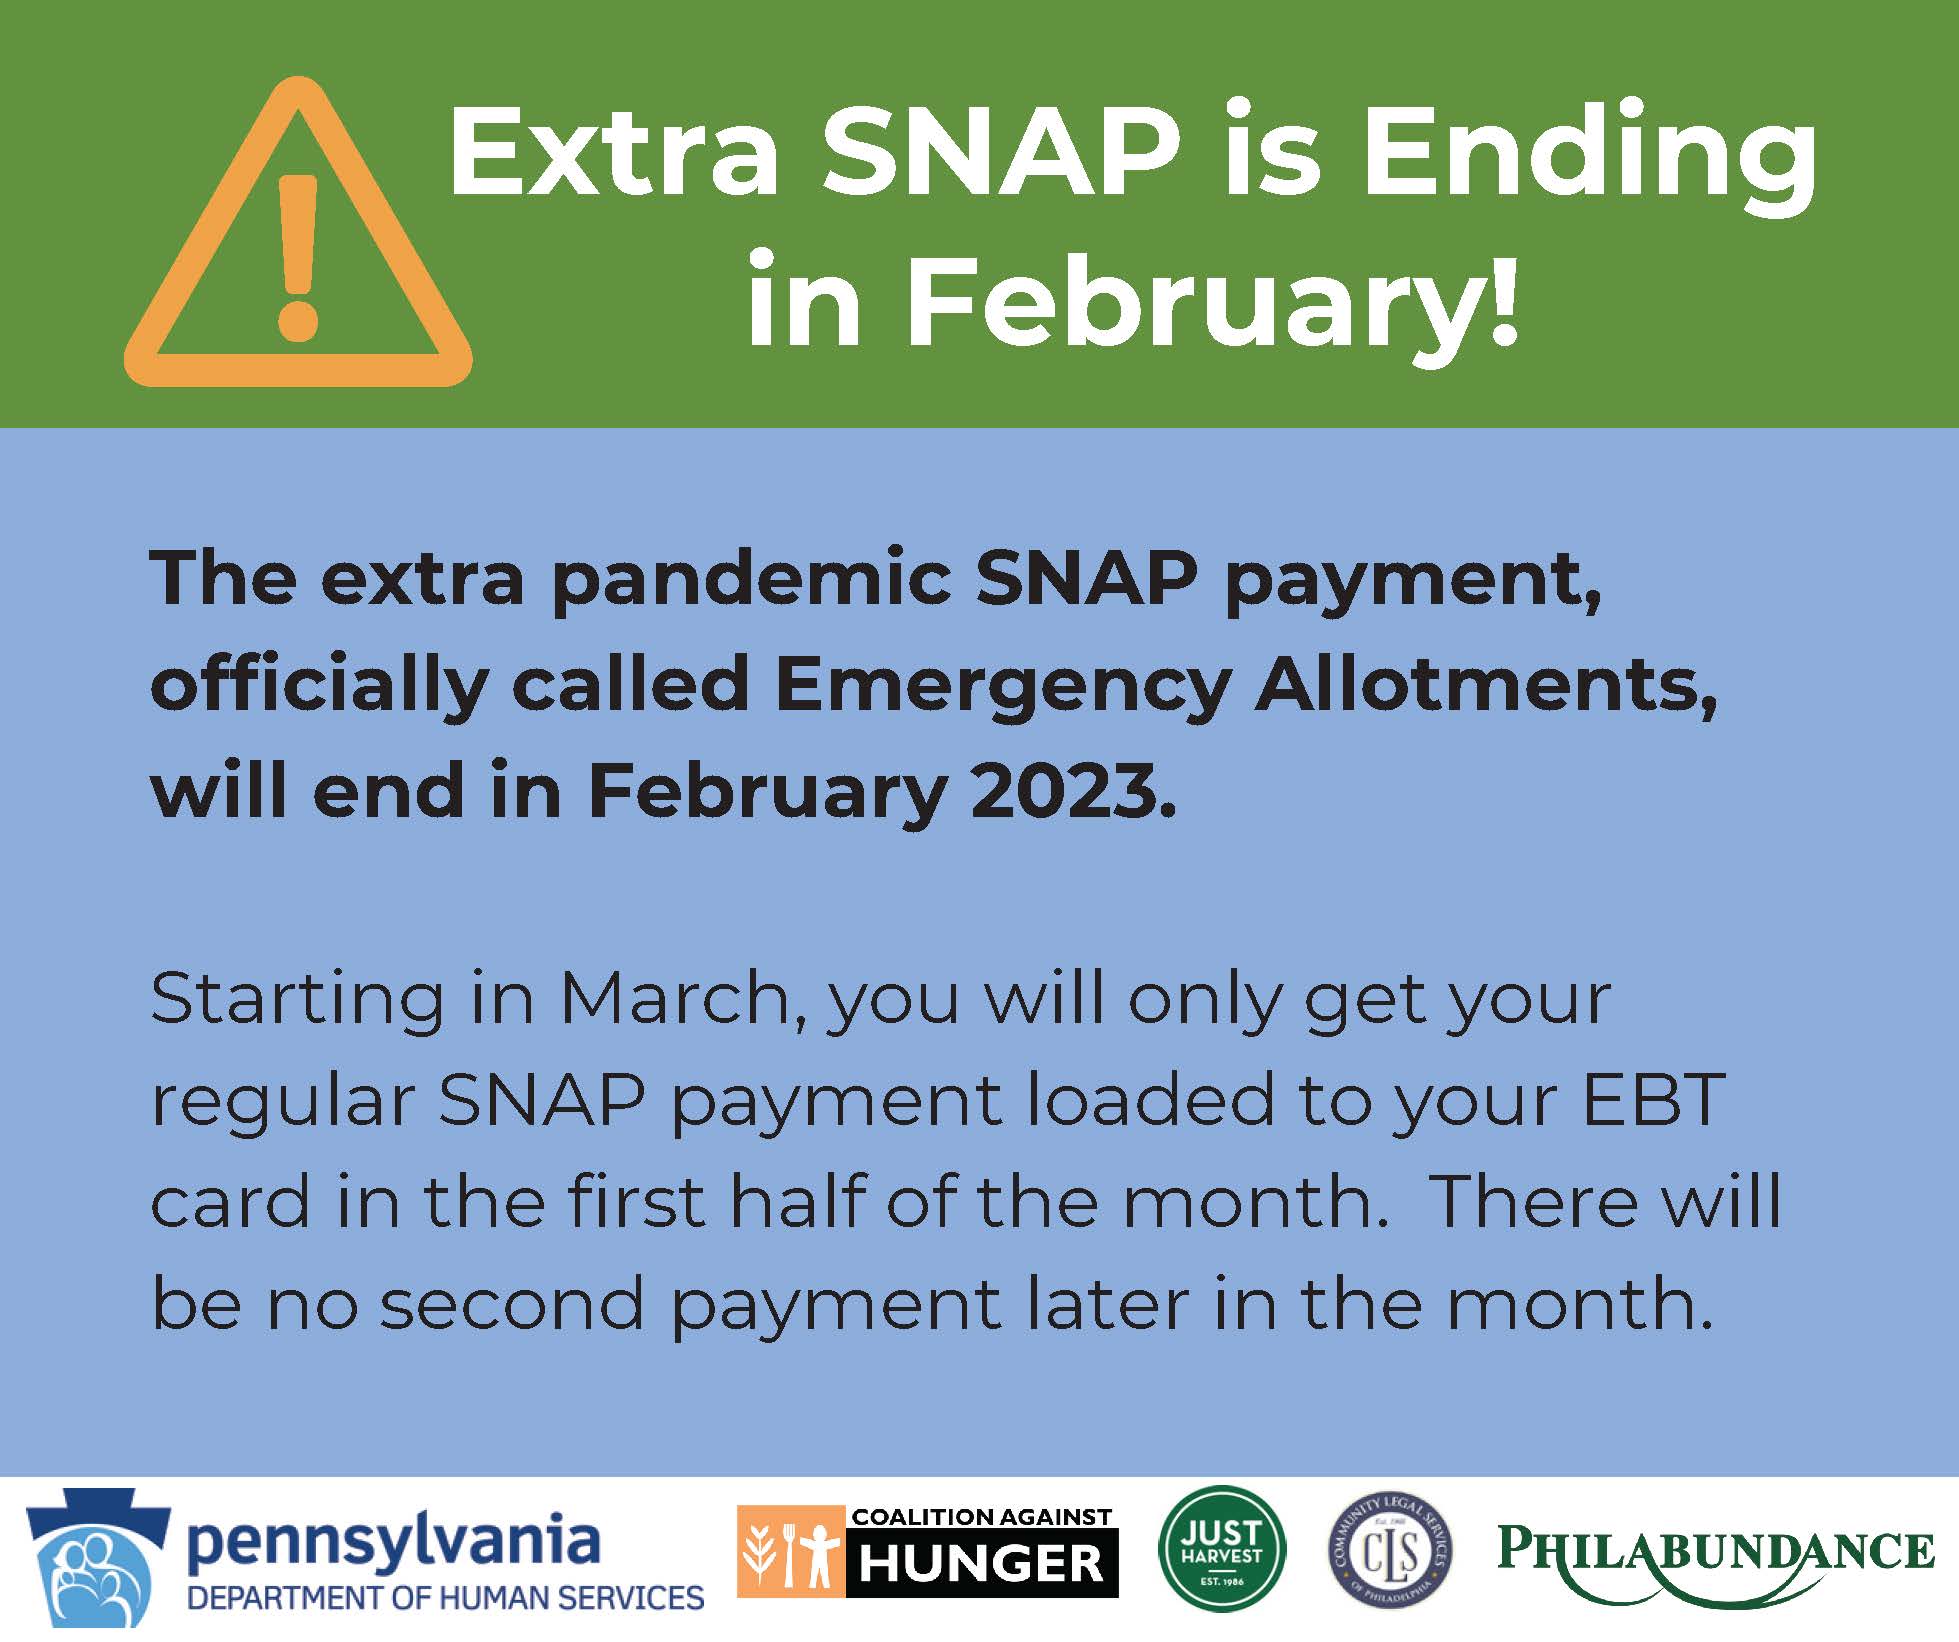 General Information Graphic Extra SNAP is Ending in February!. The extra pandemic SNAP payment, officially called Emergency Allotments, will end in February 2023. Starting in March, you will only get your regular SNAP payment loaded to your EBT card in the first half of the month. There will be no second payment later in the month.